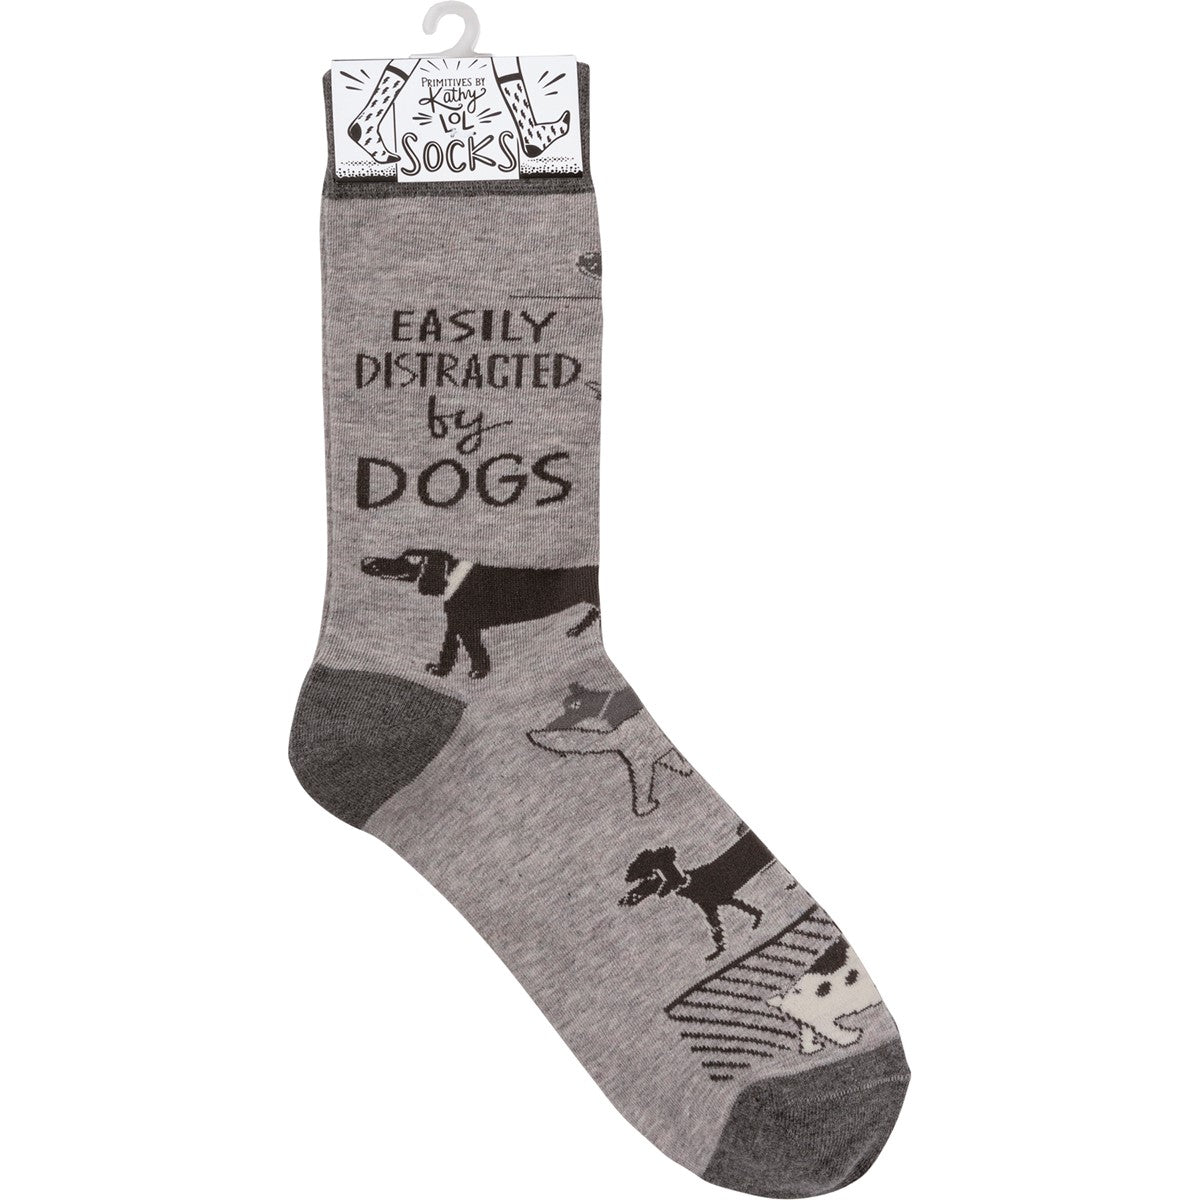 Easily Distracted By Dogs Unisex Fun Socks